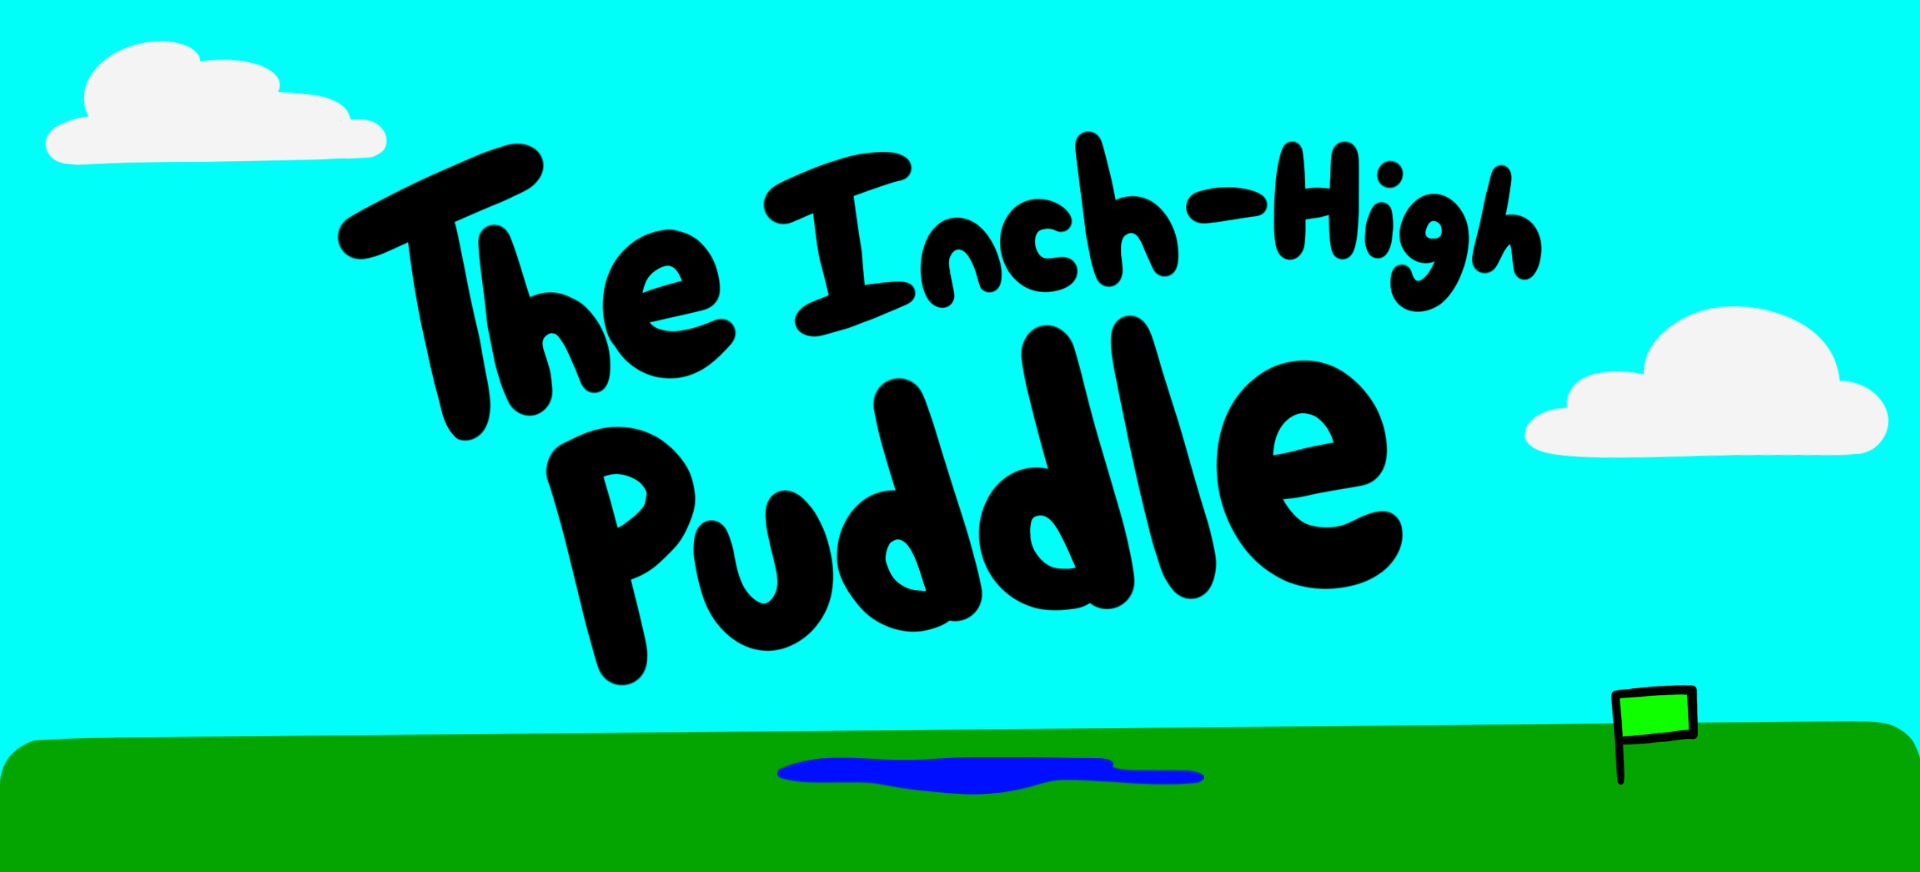 The Inch-High Puddle